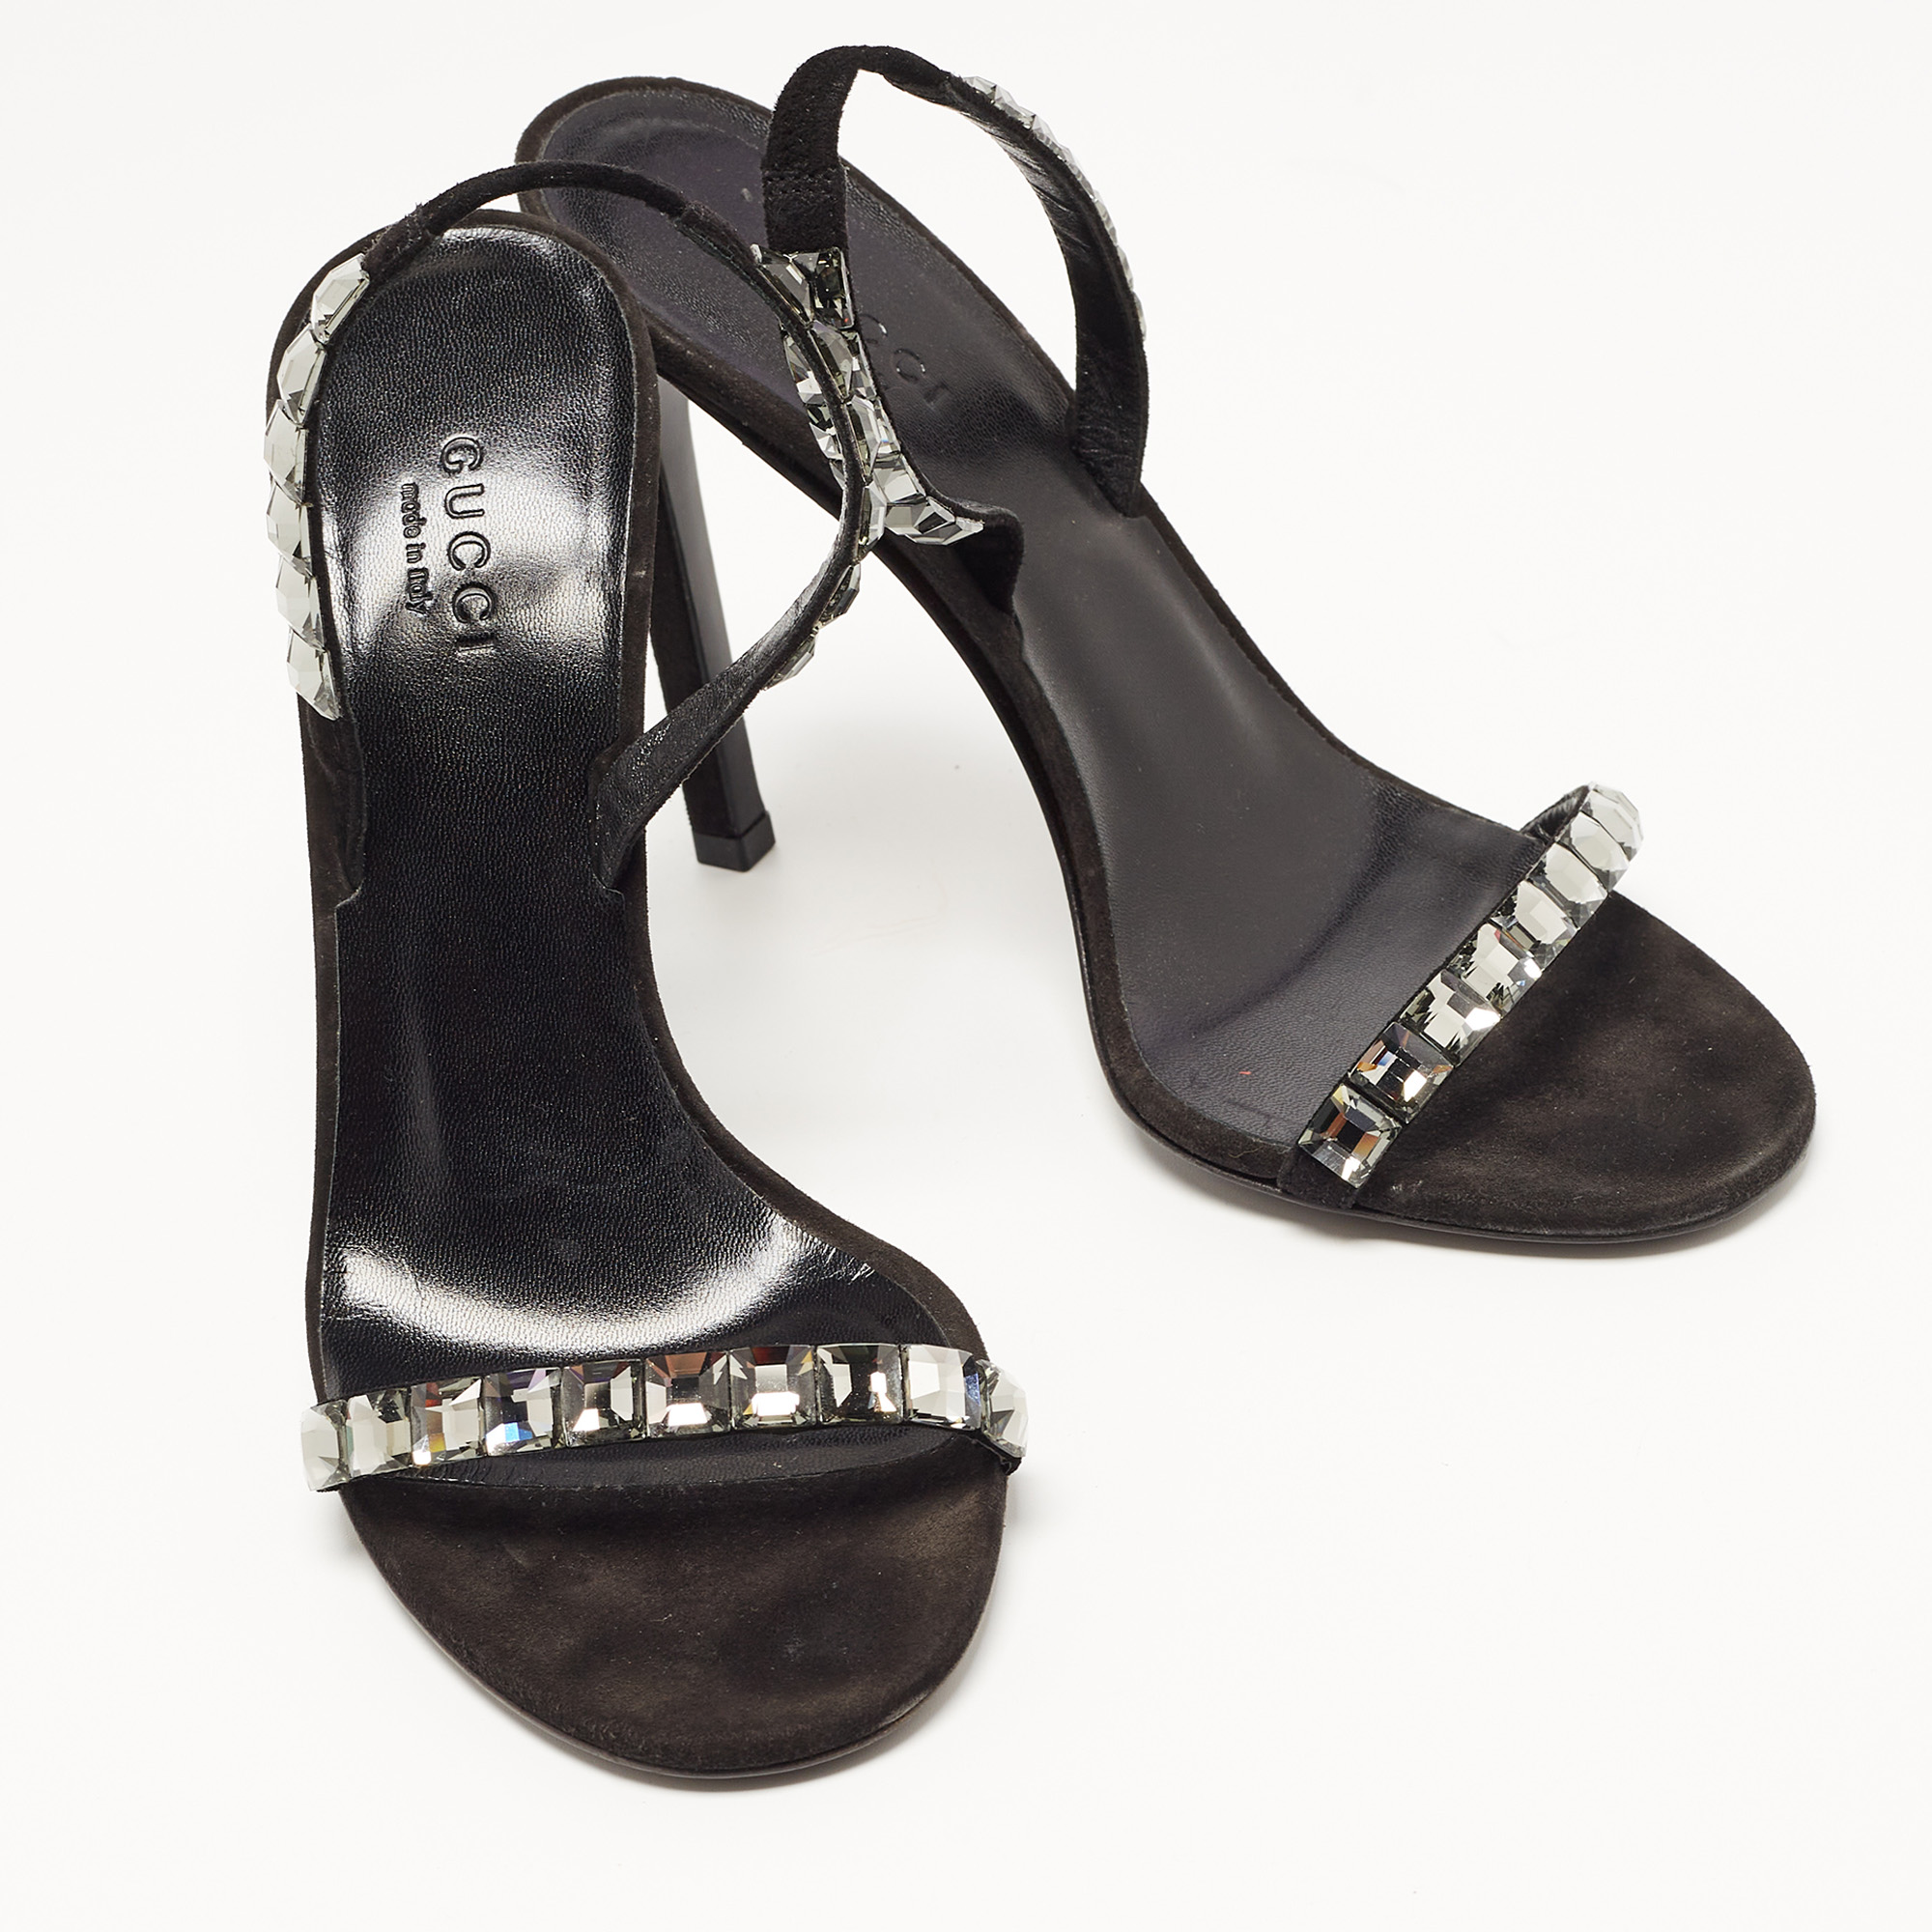 Gucci Black Suede Embellished Mallory Sandals Size 37